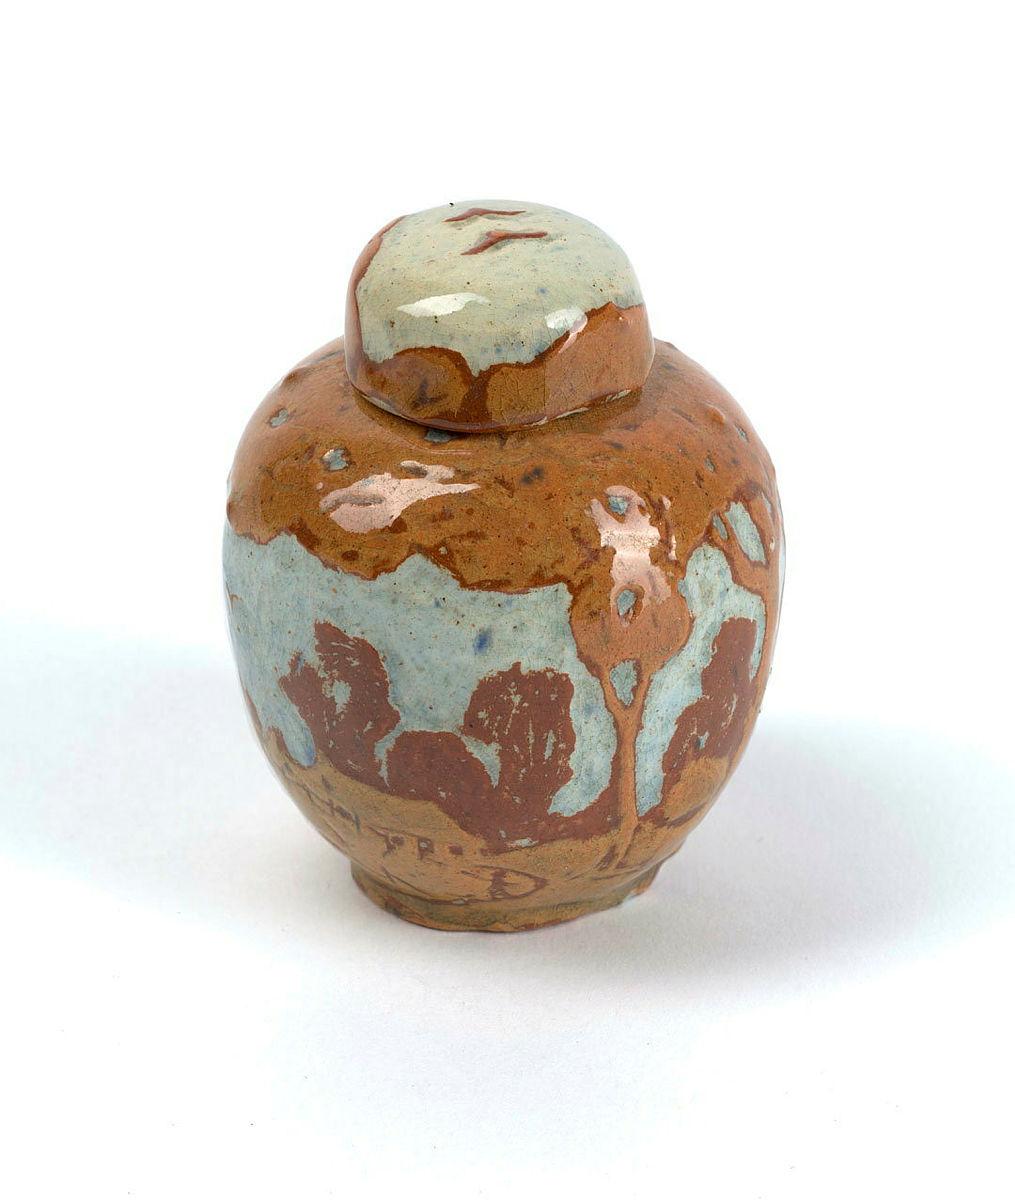 Artwork Small covered jar: Bush scene with shed this artwork made of Earthenware, gold and terracotta clays over white, incised with a bush scene with shed and fence. Light blue glaze, created in 1925-01-01